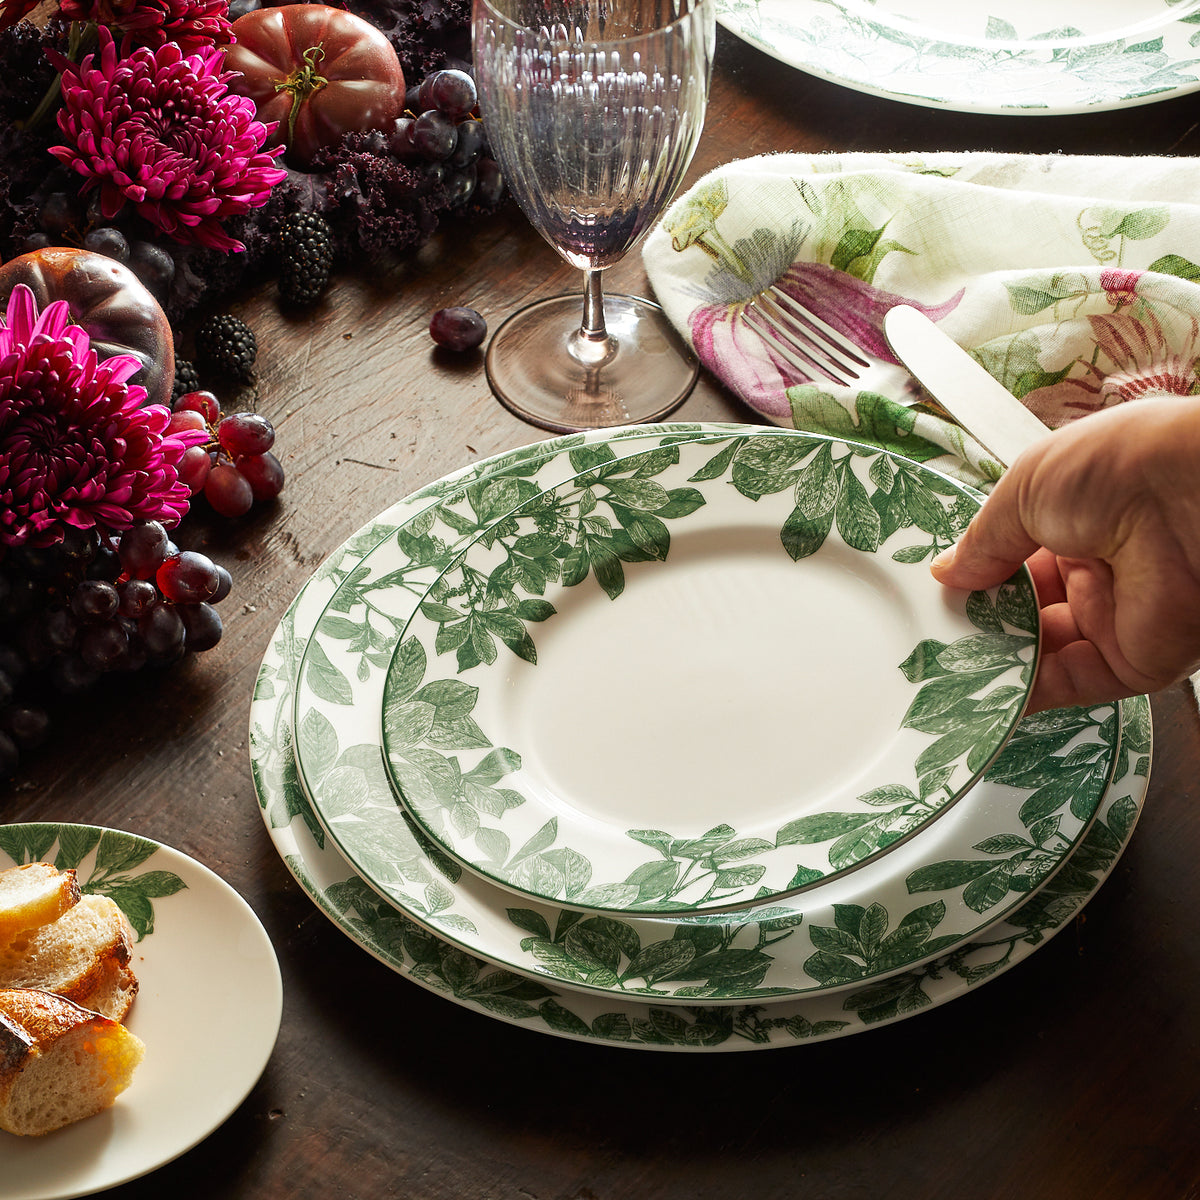 A hand setting a Caskata Arbor Green Rimmed Salad Plate with green leaf patterns on a table, next to larger plates, a drinking glass, a floral napkin, purple flowers, grapes, and a small bread plate.